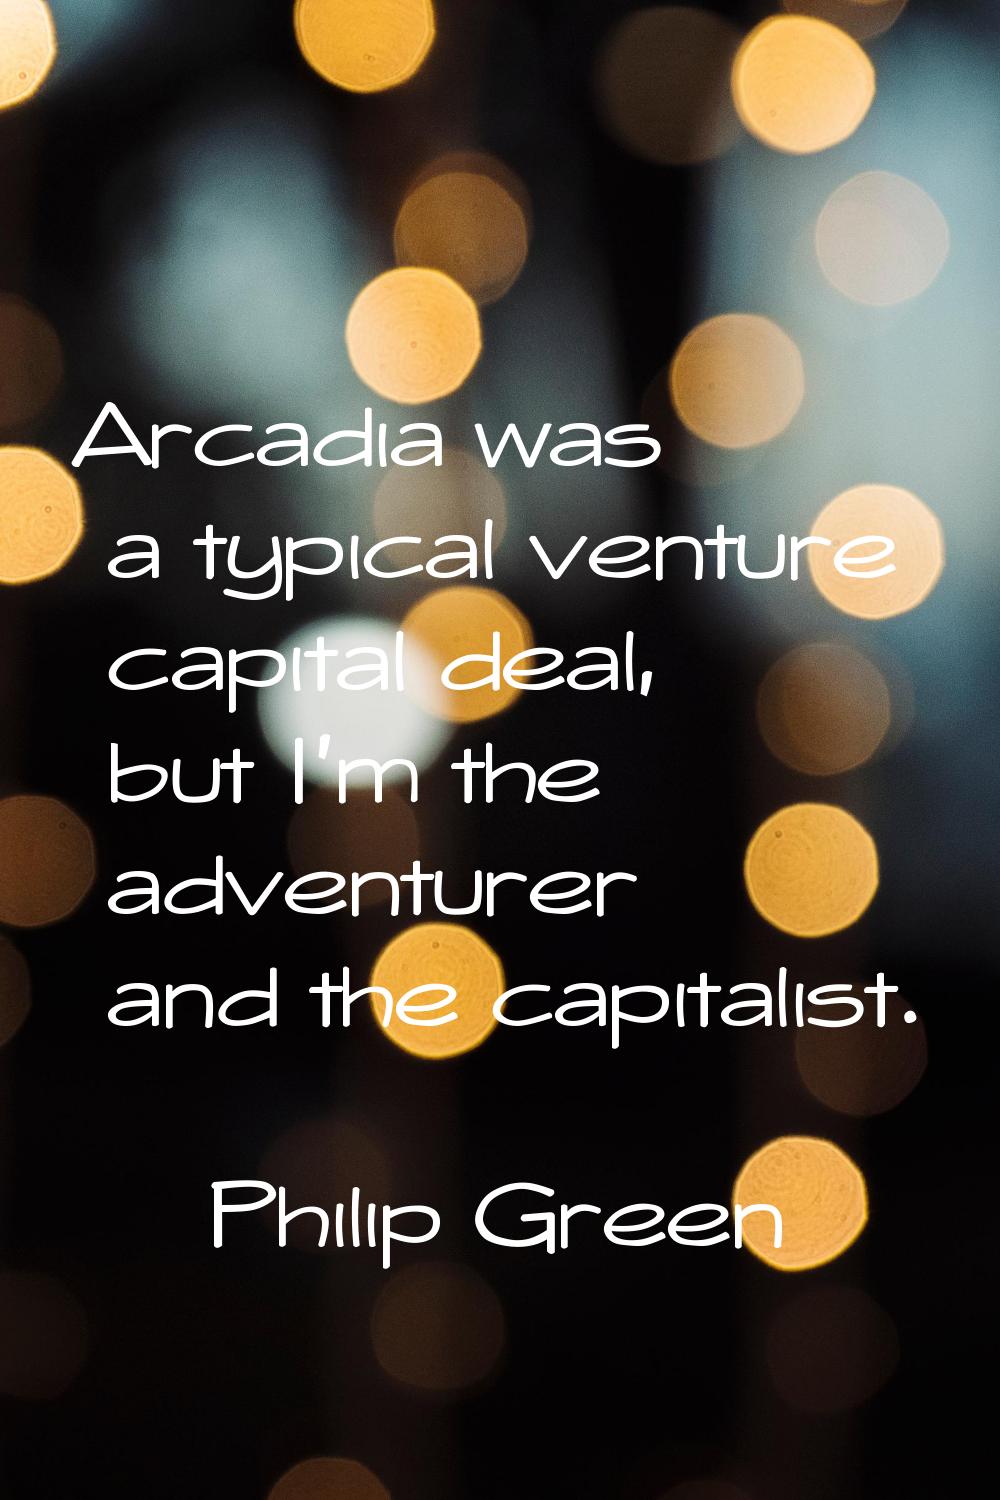 Arcadia was a typical venture capital deal, but I'm the adventurer and the capitalist.